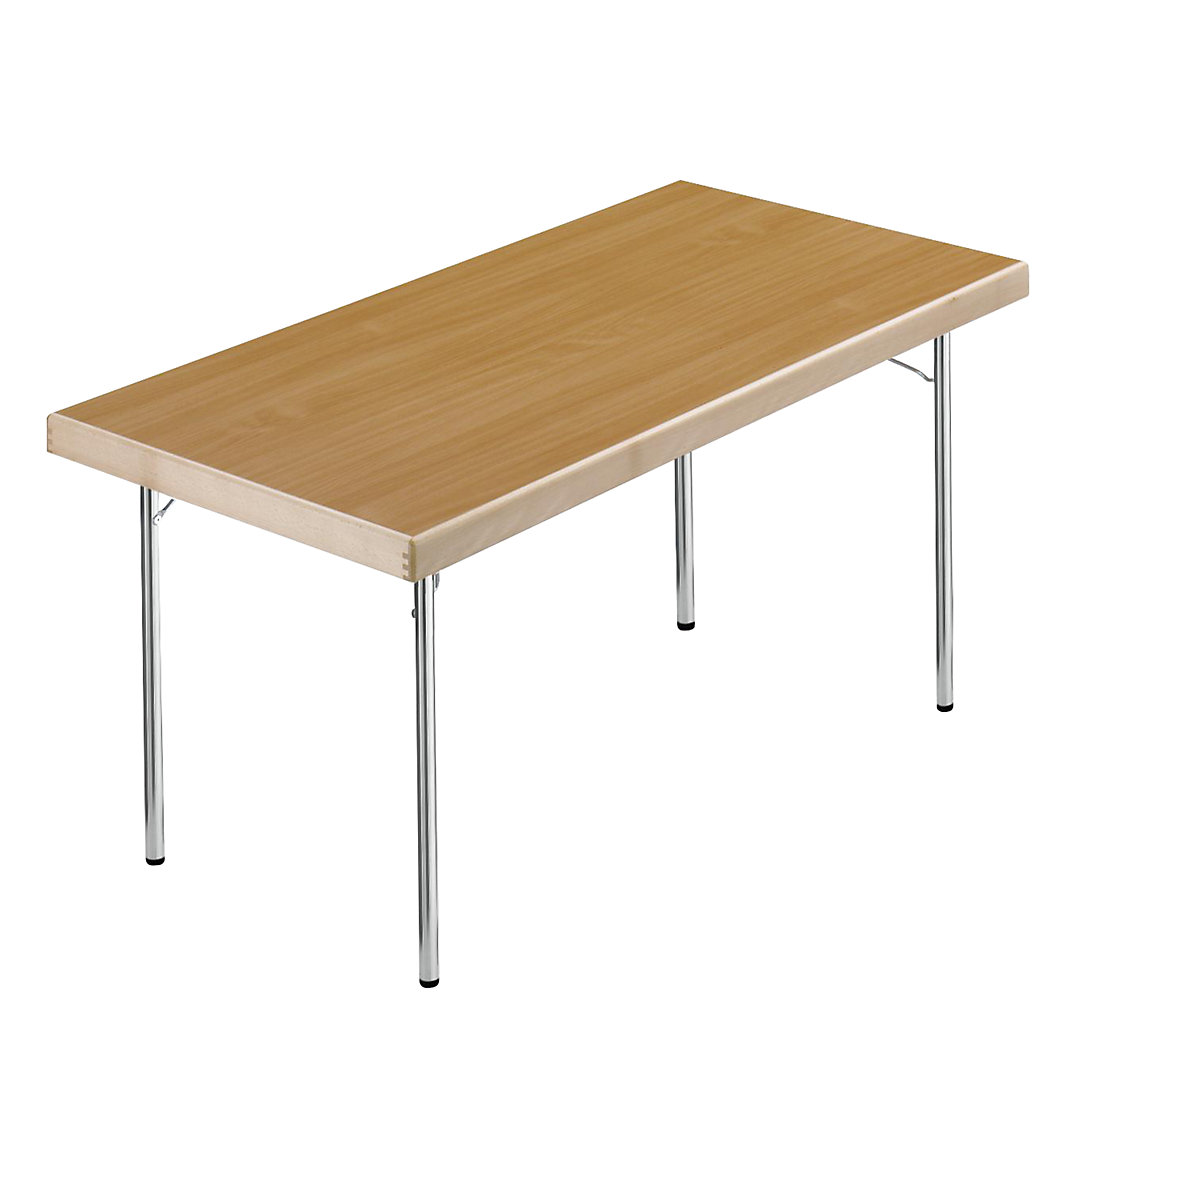 Folding table, 4-footed frame, 1500 x 800 mm, chrome plated frame, beech finish tabletop-15